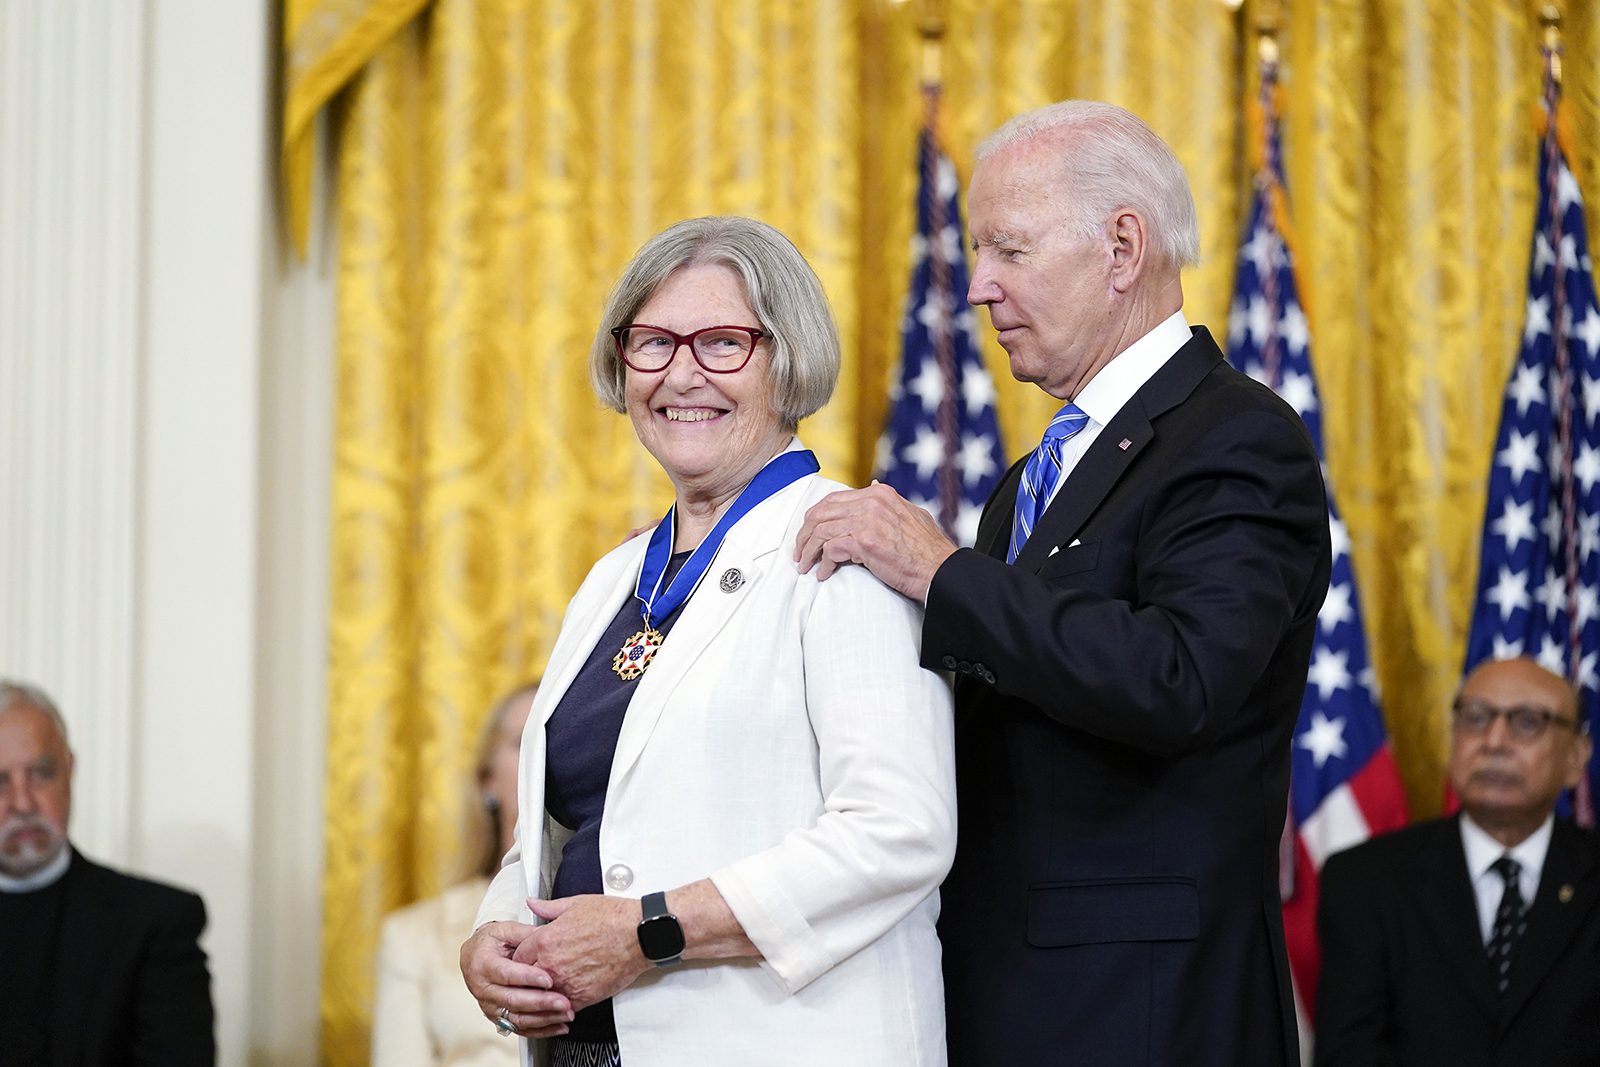 President Joe Biden awards the nation's highest civilian honor, the Presidential Medal of Freedom, to Sister Simone Campbell, during a ceremony in the East Room of the White House in Washington, Thursday, July 7, 2022. Campbell is a member of the Sisters of Social Service and former Executive Director of NETWORK, a Catholic social justice organization. She is also a prominent advocate for economic justice, immigration reform, and healthcare policy. (AP Photo/Susan Walsh)